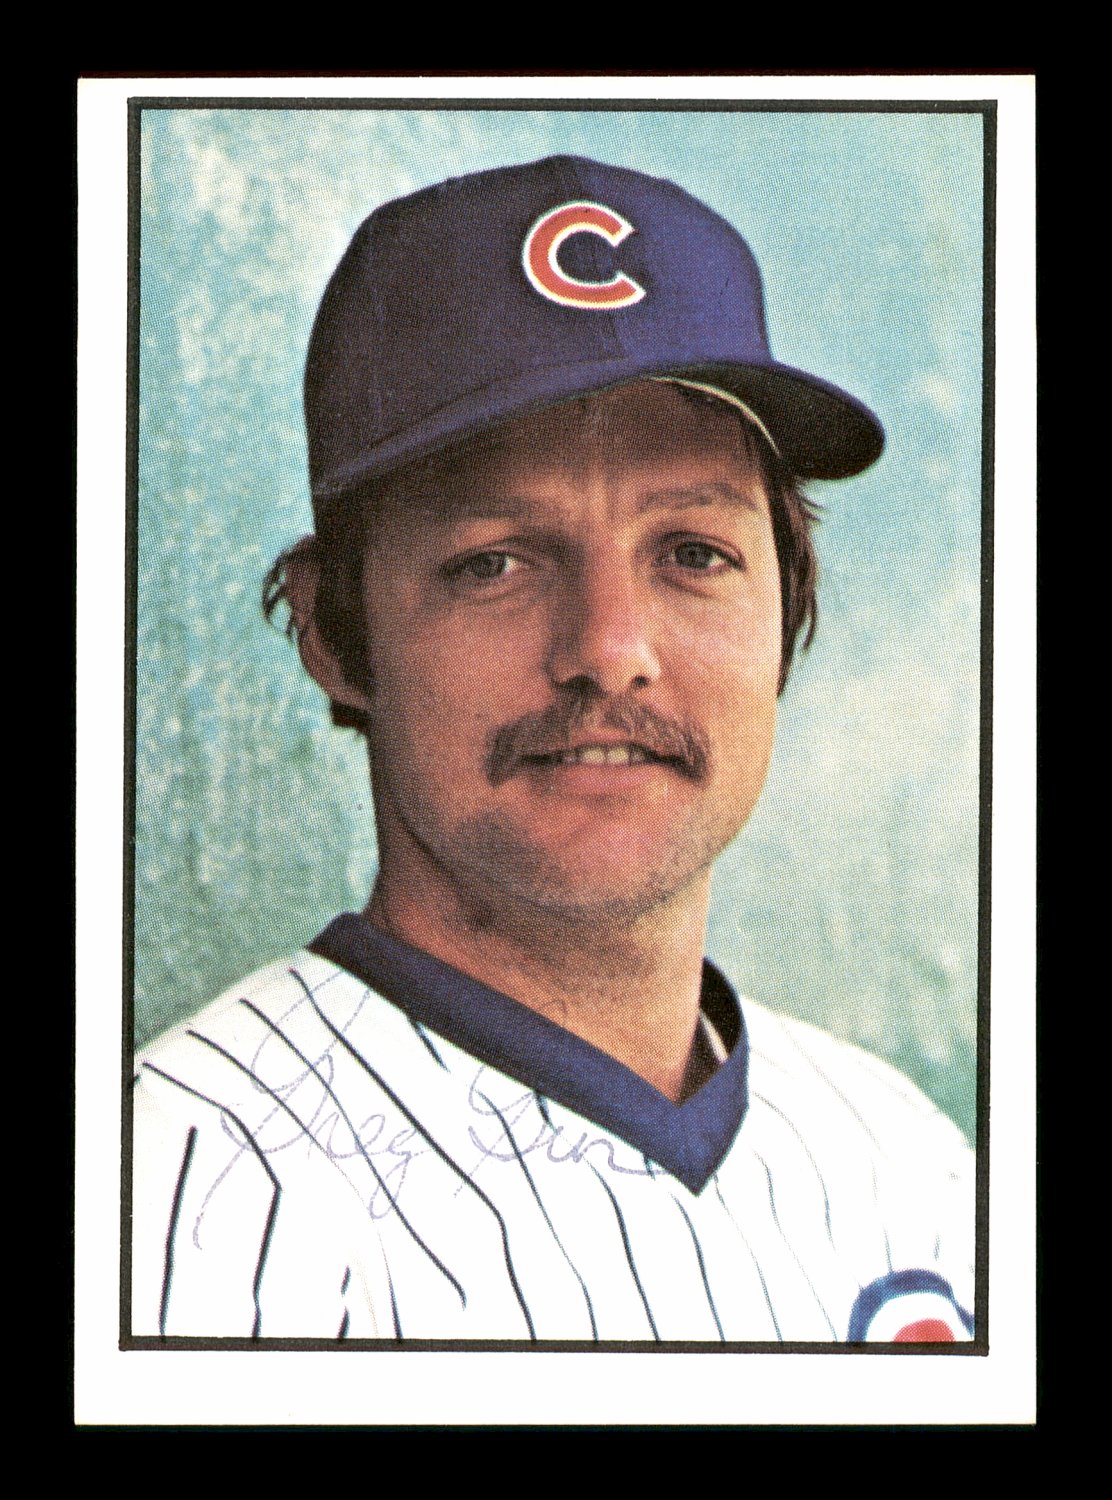 Greg Gross Autographed Signed 1978 Sspc Card #257 Chicago Cubs #172385